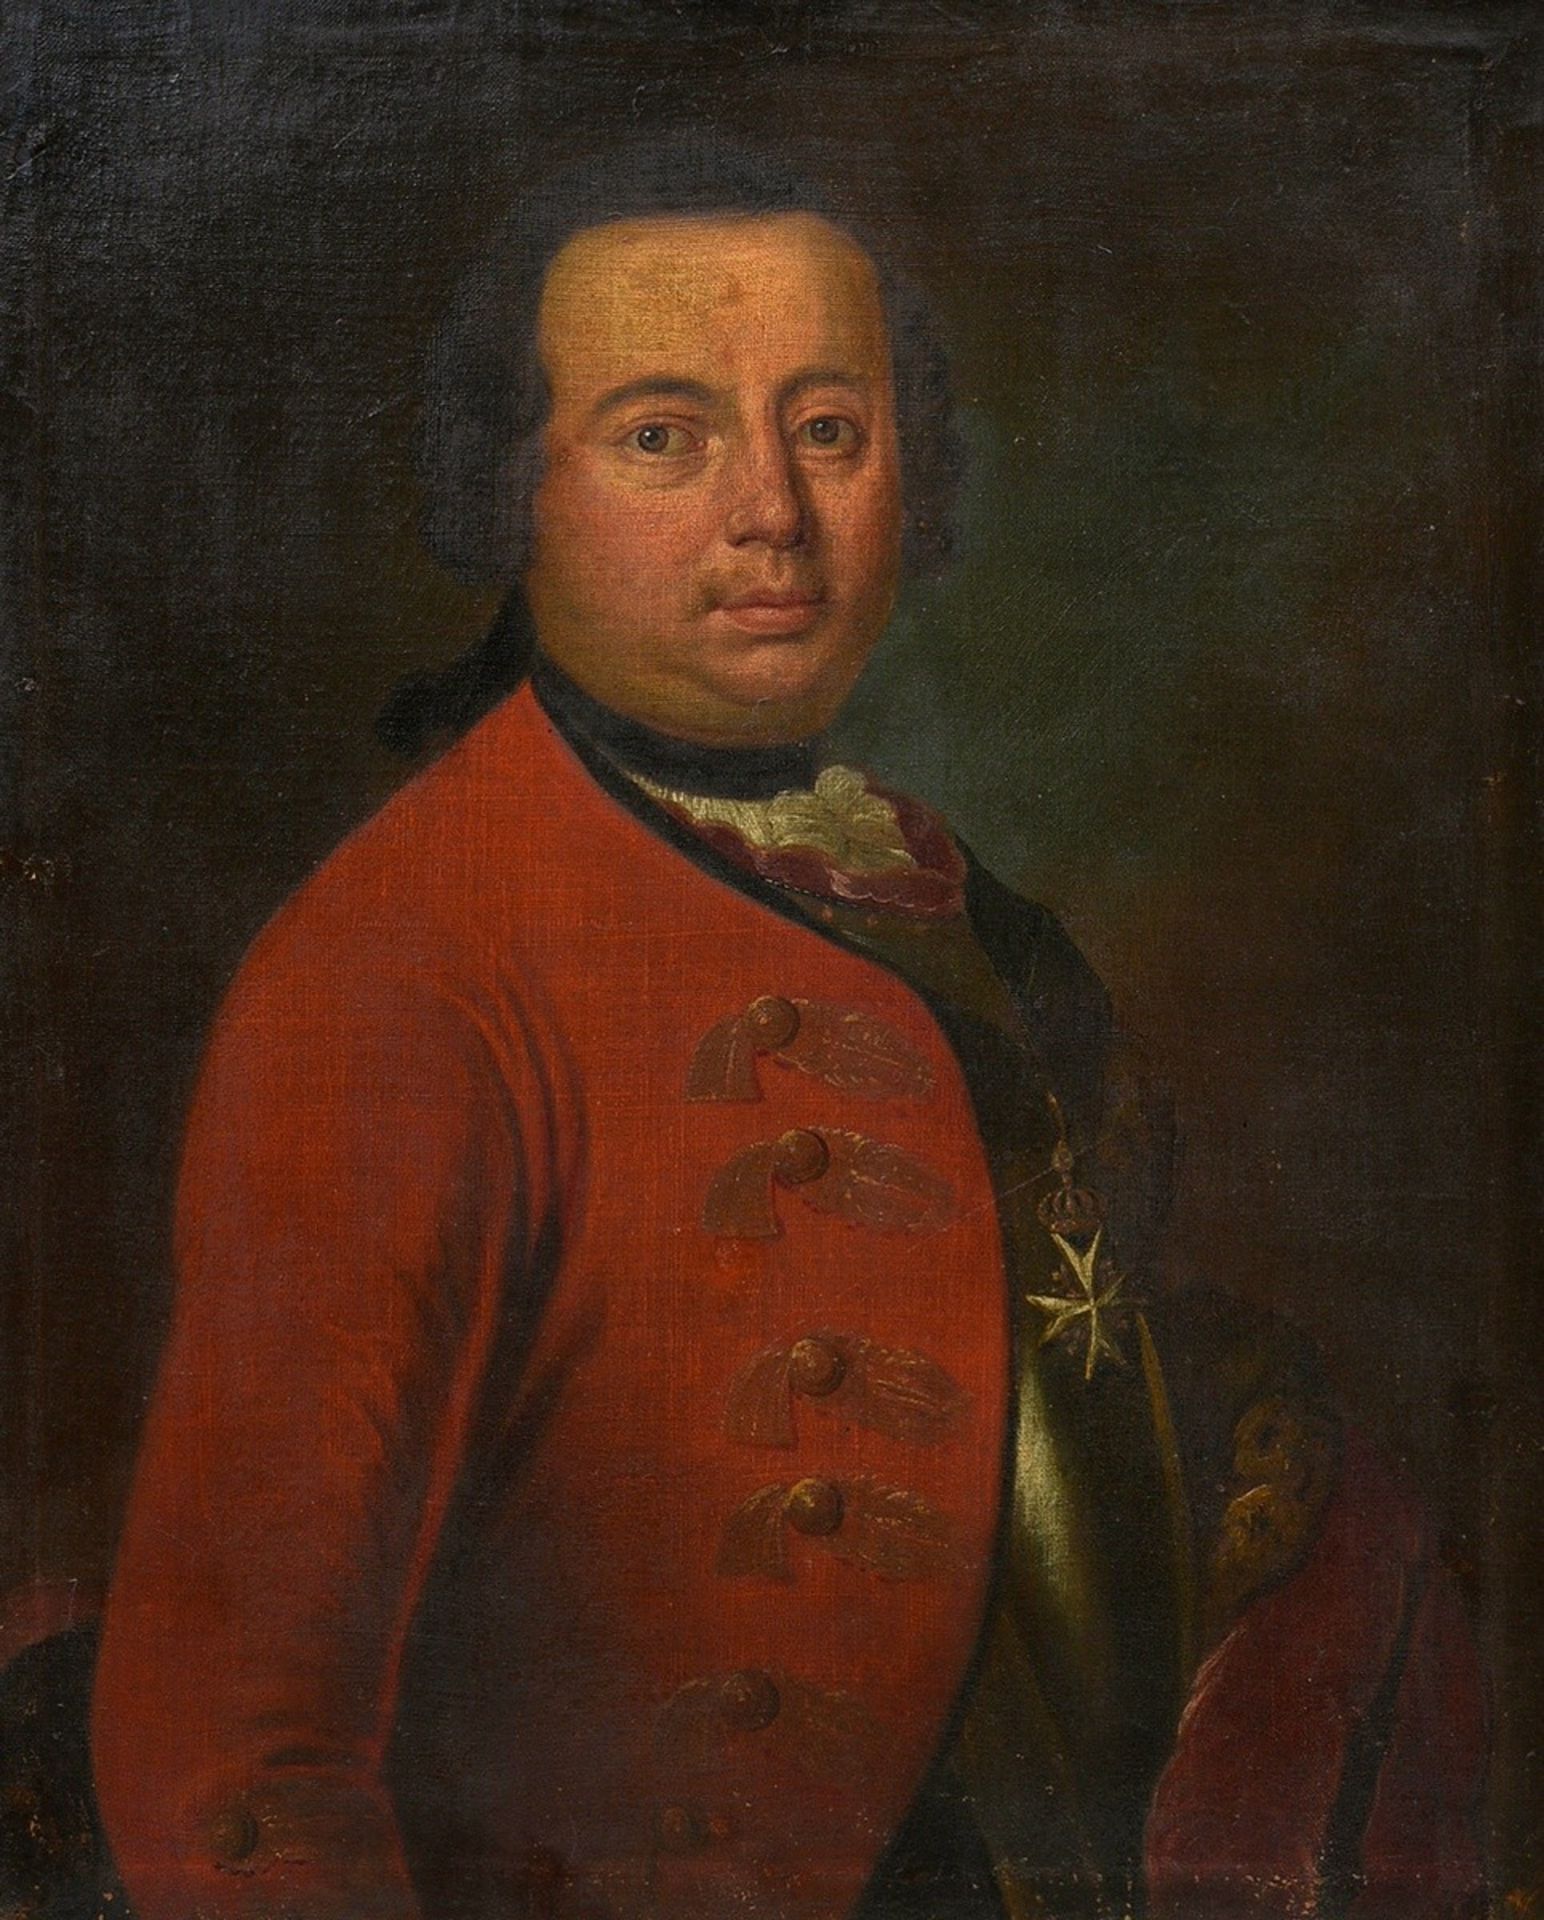 Unknown portraitist of the 18th c. "Man with red skirt, armor and orders" (from the family v. Trosc